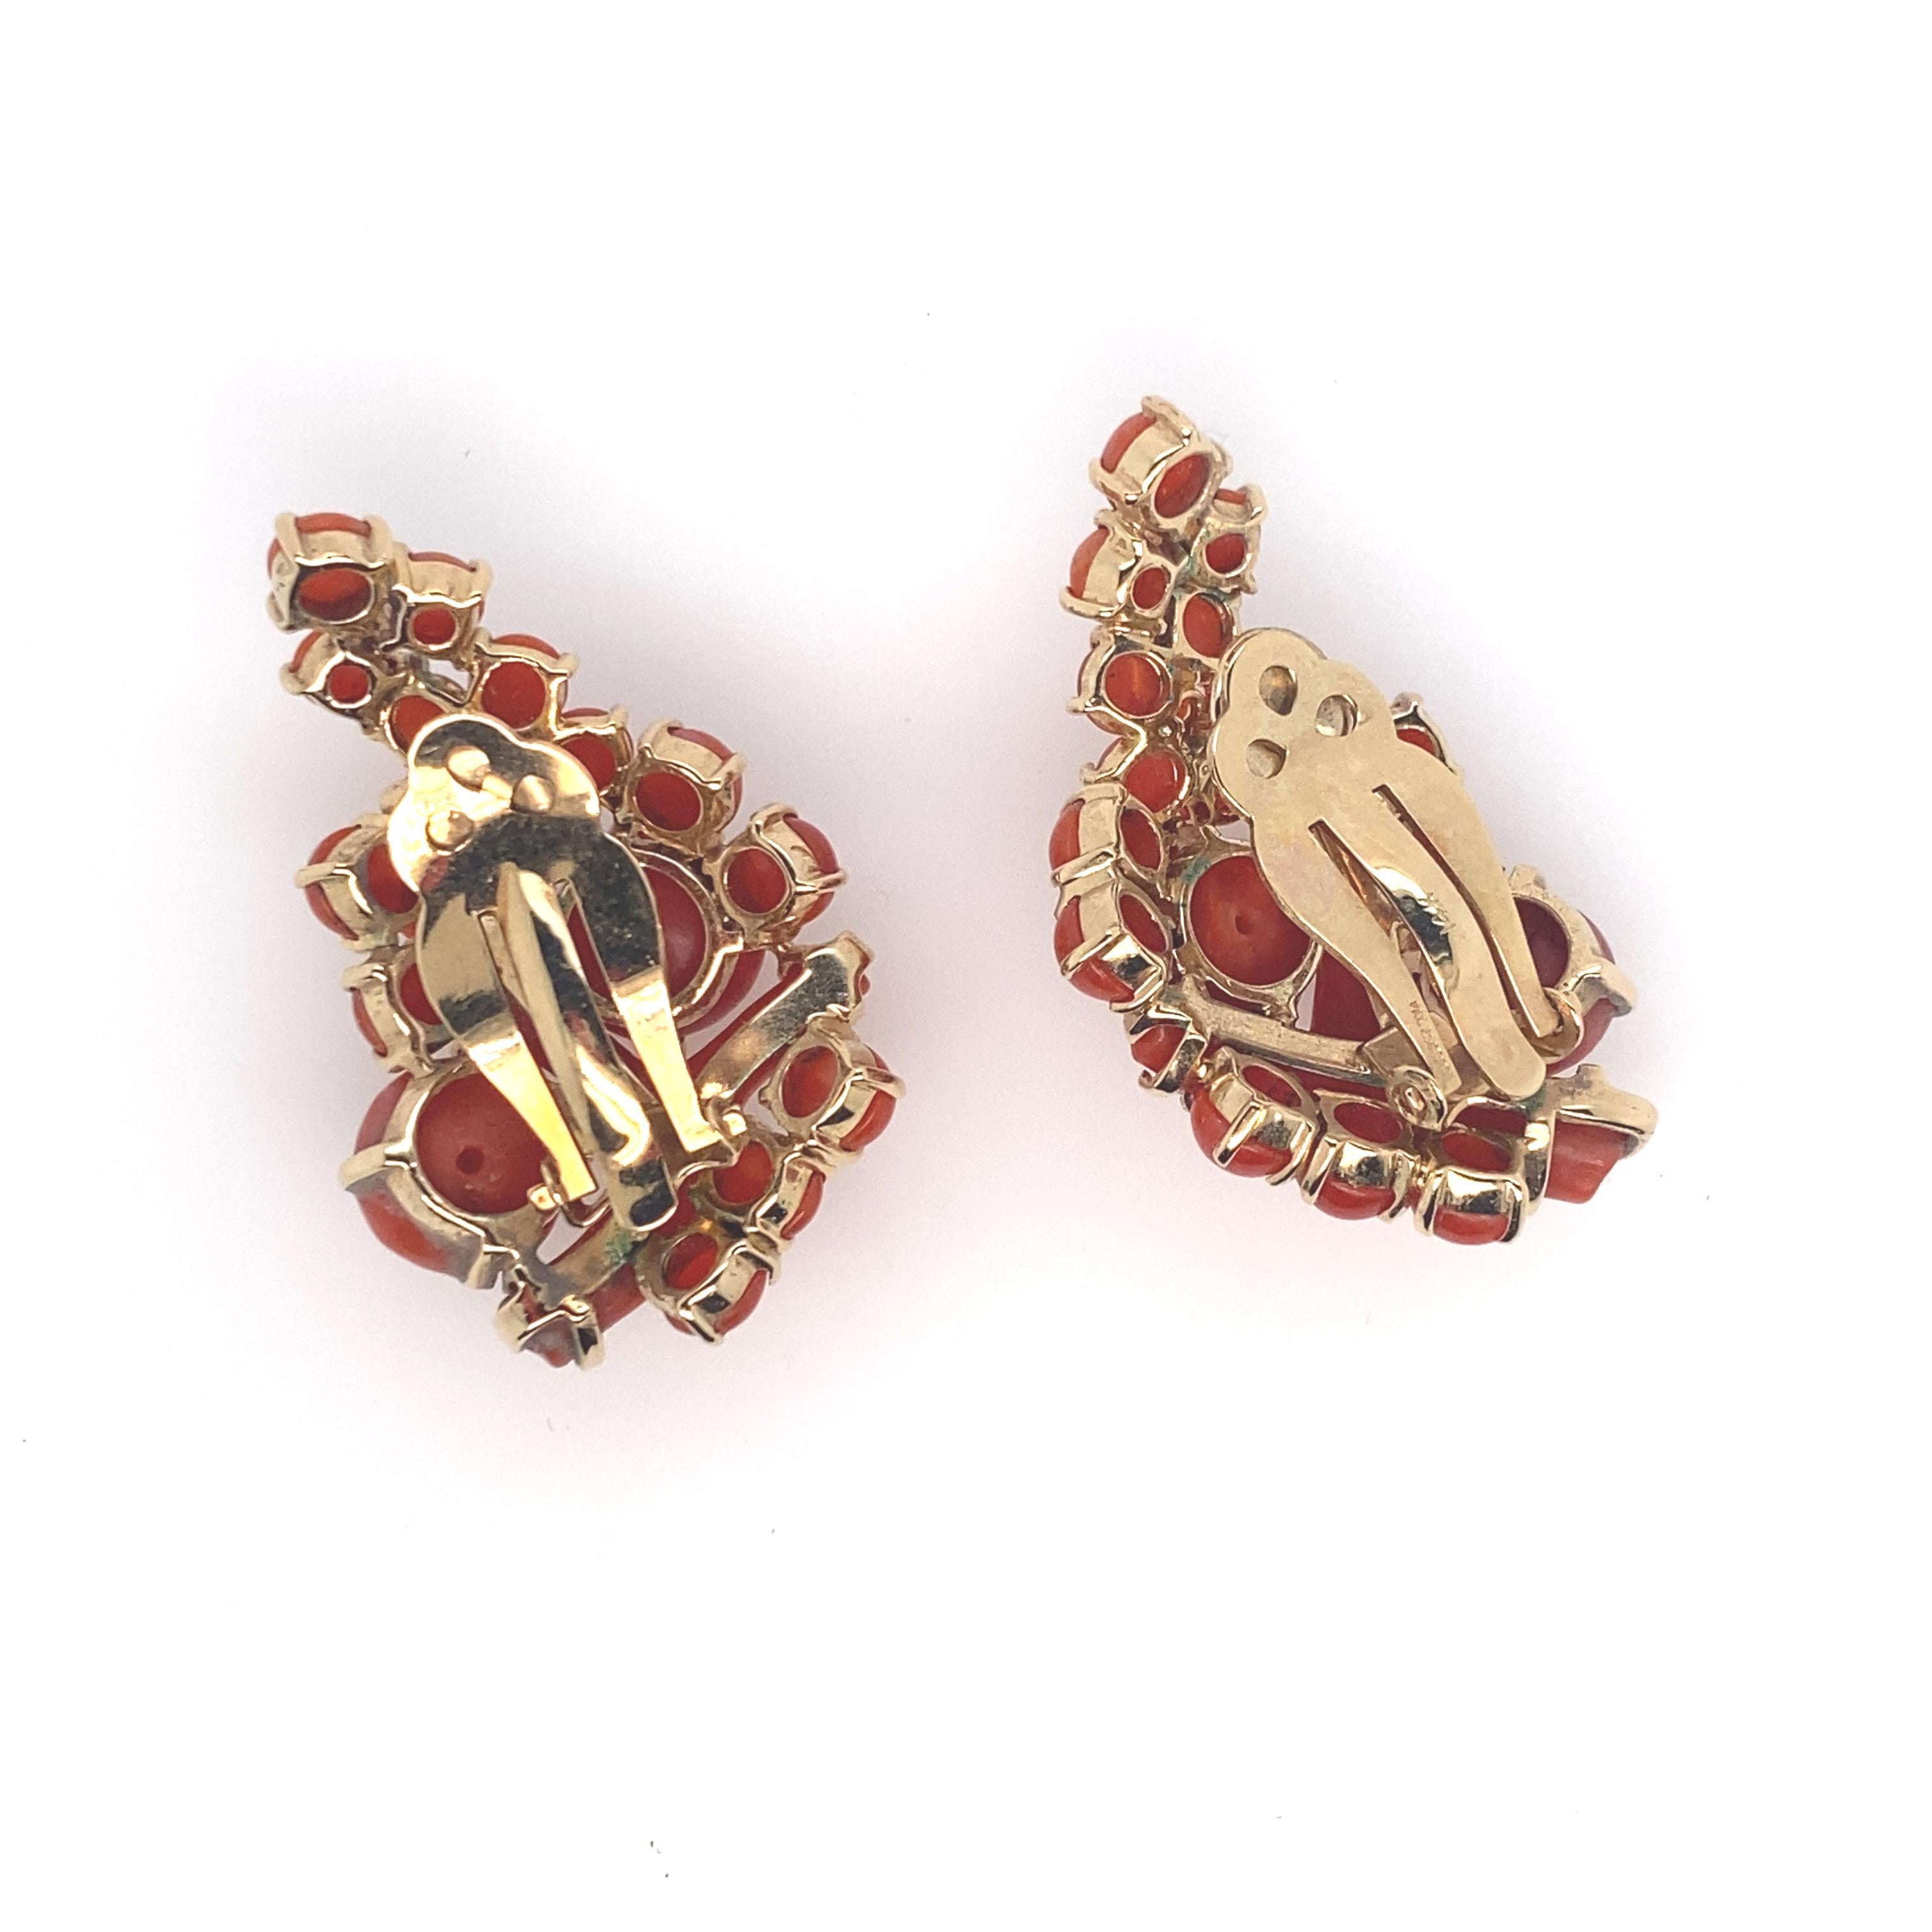 LAST PRICE REDUCTION!! Get these beautiful earrings before they are gone!
One-of-a-kind Vintage Red Coral earrings from Italy.  Circa 1950's.  Featuring two beautiful, free form coral branch earrings, also set with  round red coral cabachons.  Truly